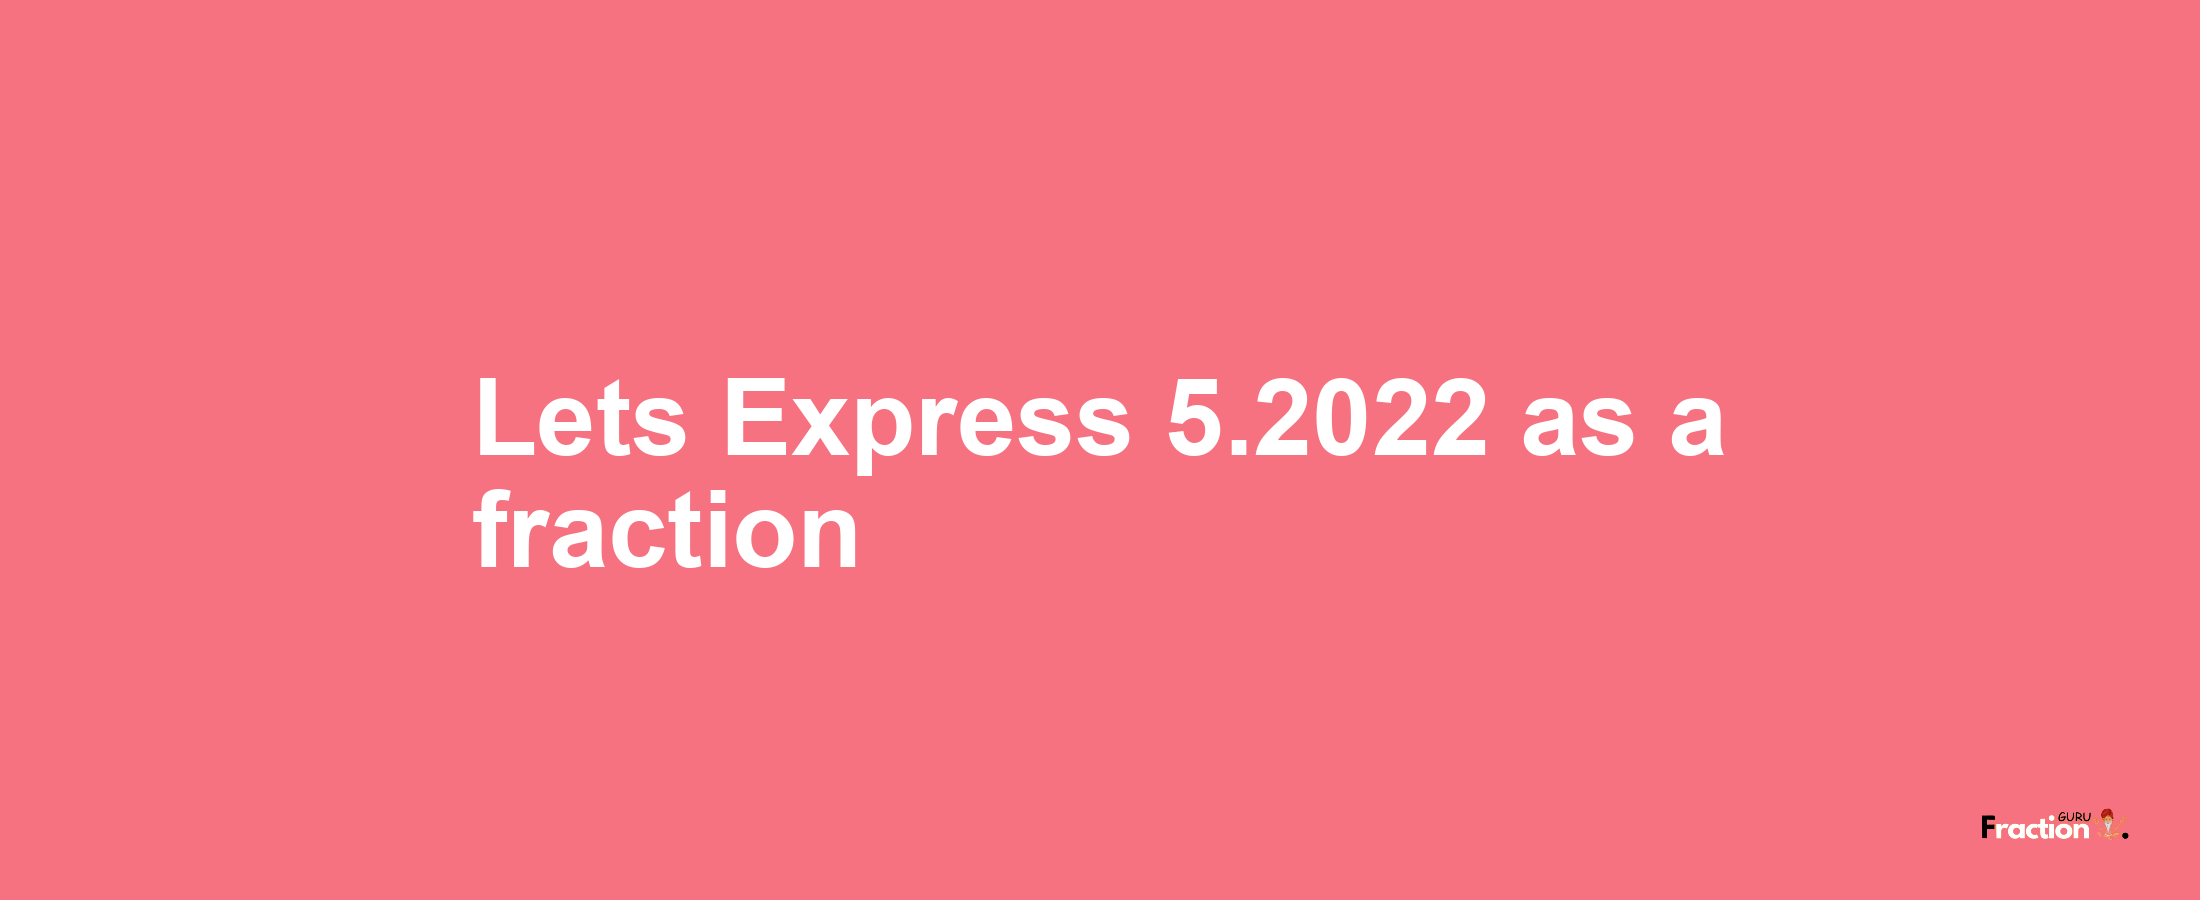 Lets Express 5.2022 as afraction